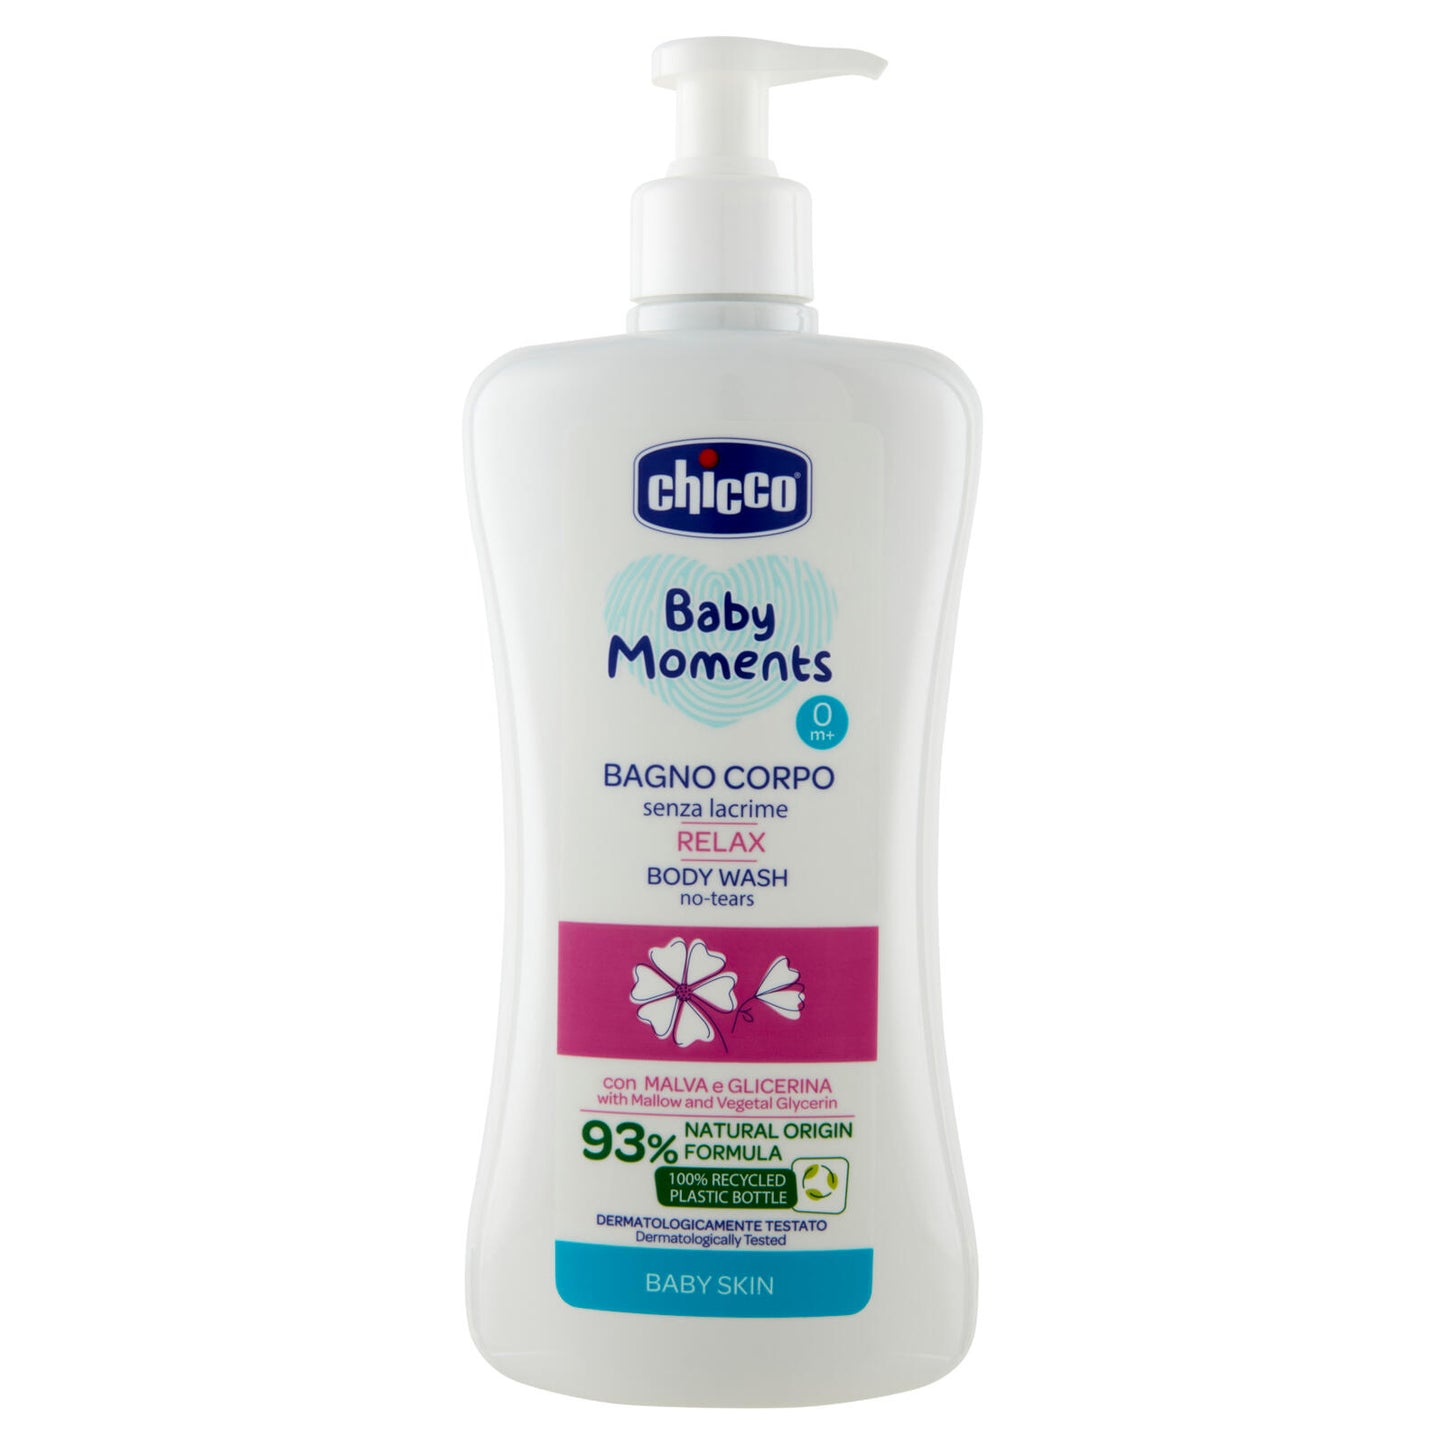 chicco Baby Moments Bagno Corpo Relax 500 mL ->